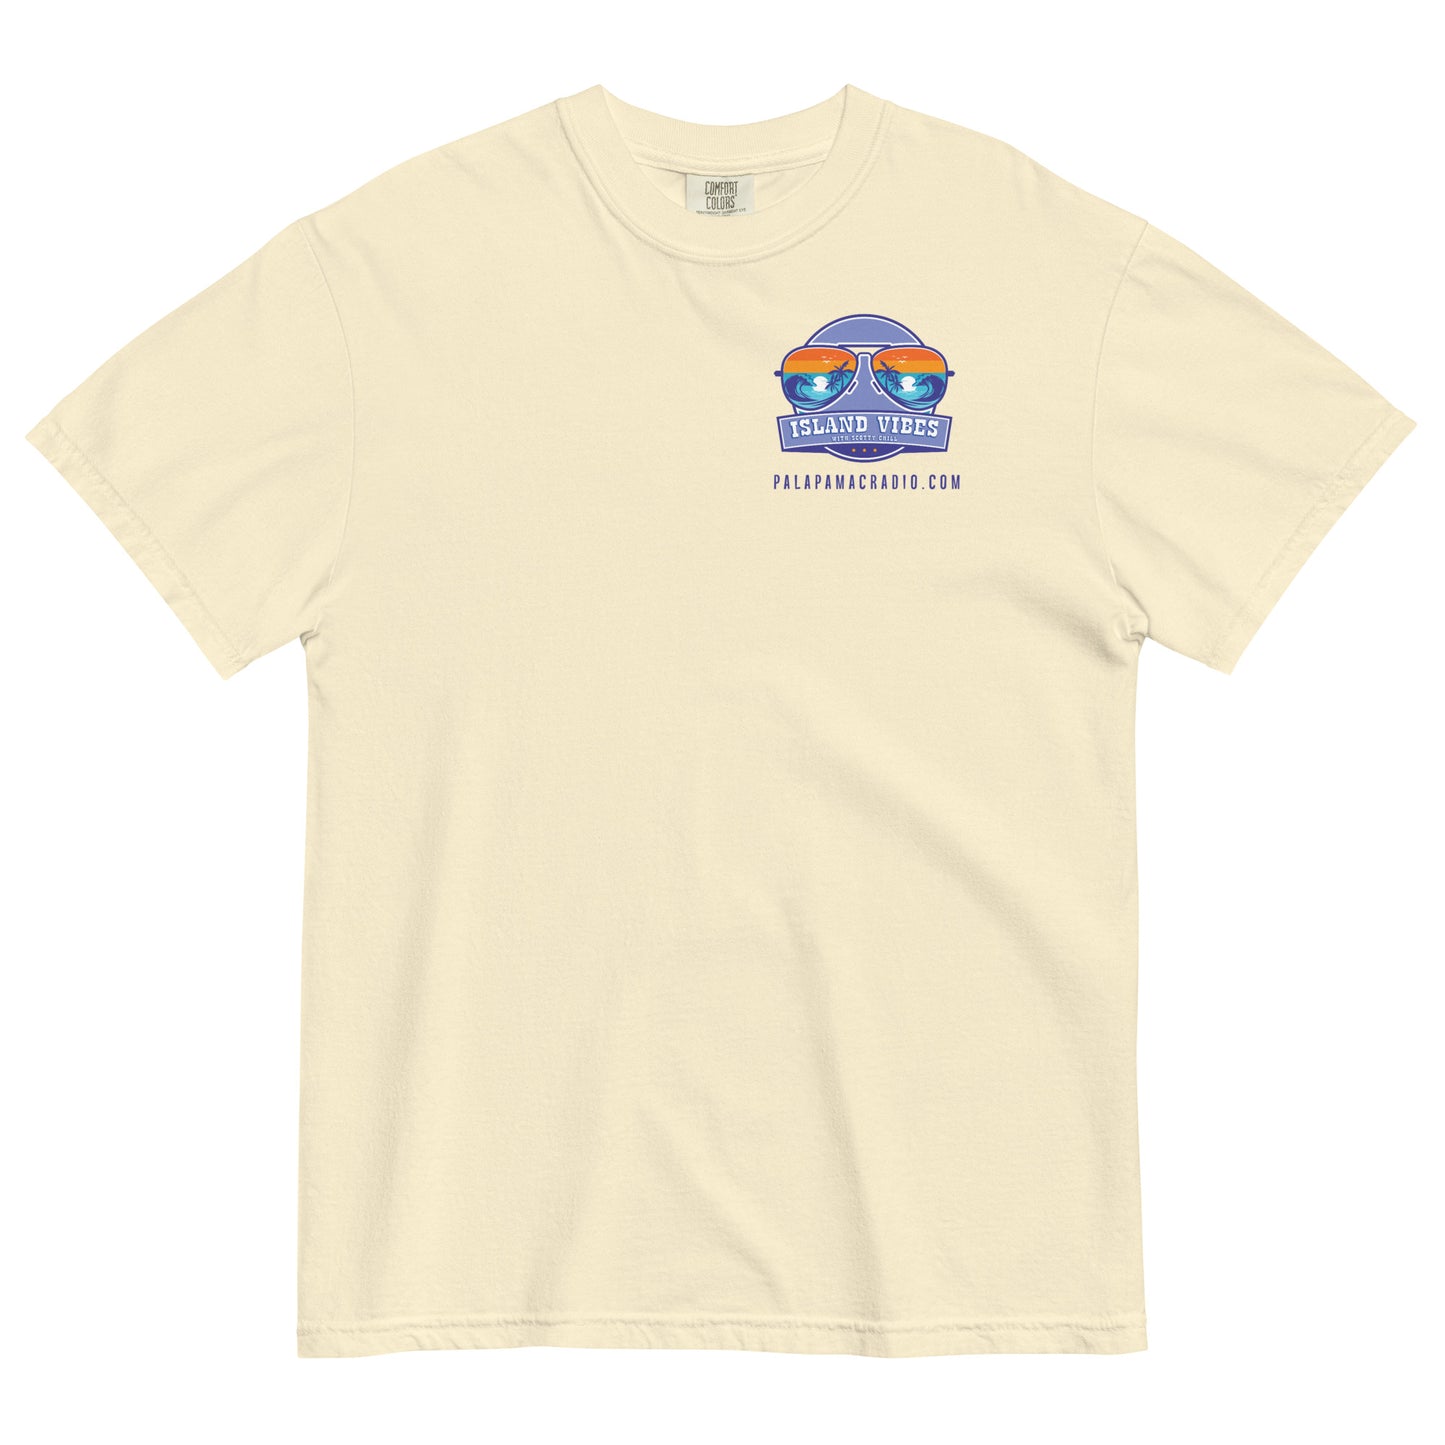 Less Talk, More Music and Island Vibes Logo 2 sided print Heavy 100% Cotton Tee - 3 Color Options